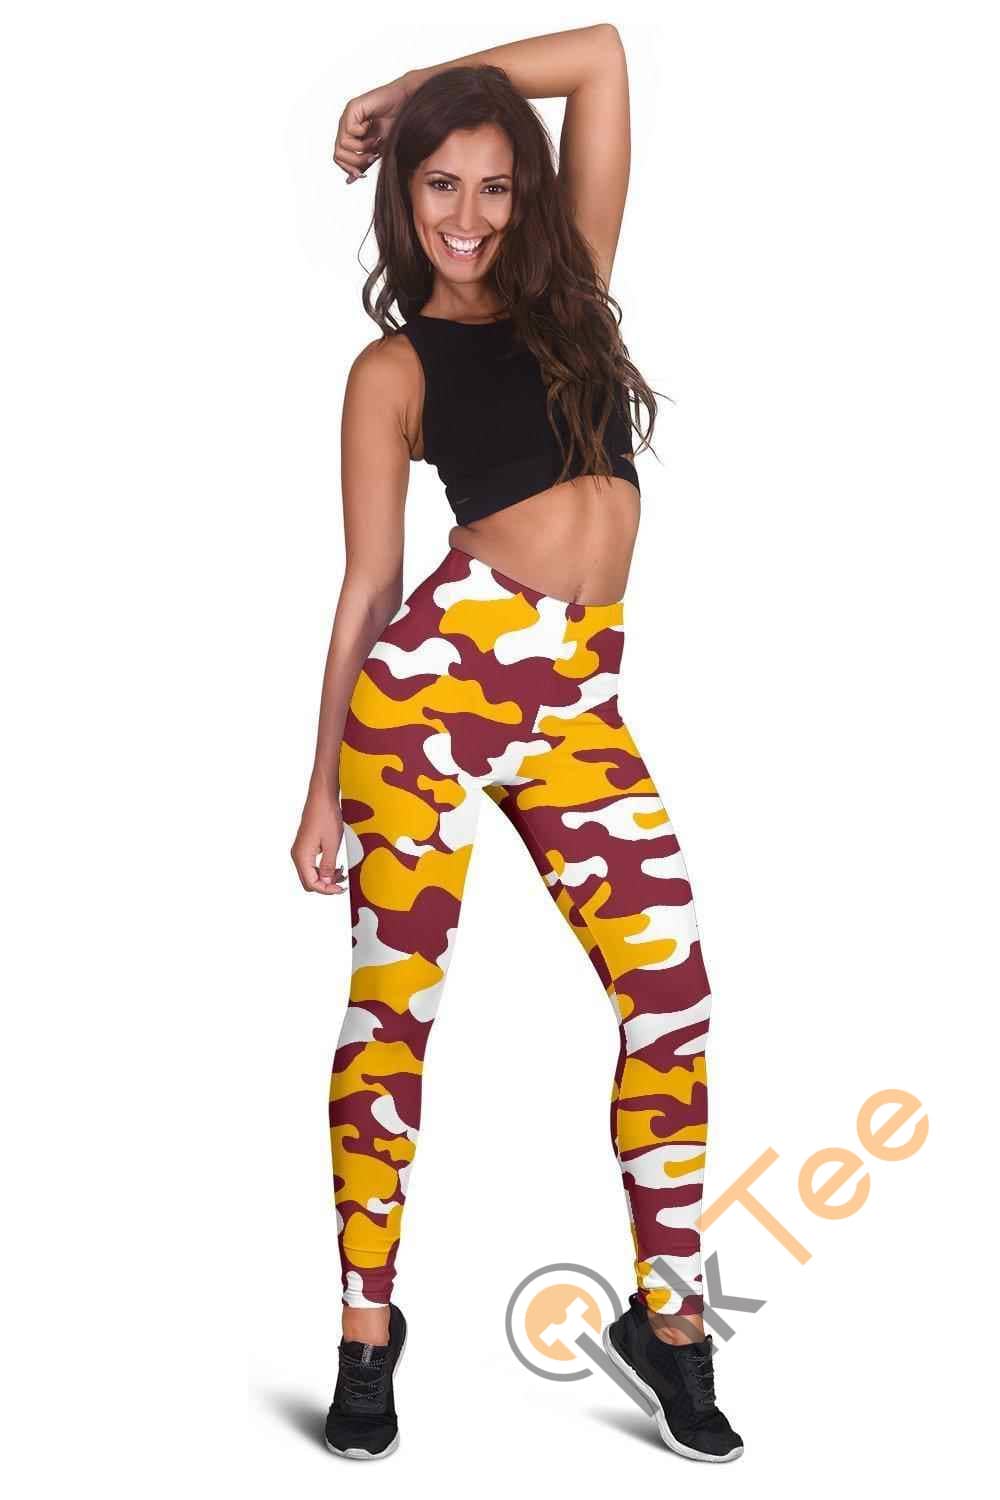 Inktee Store - Washington Redskins Inspired Tru Camo 3D All Over Print For Yoga Fitness Fashion Women'S Leggings Image